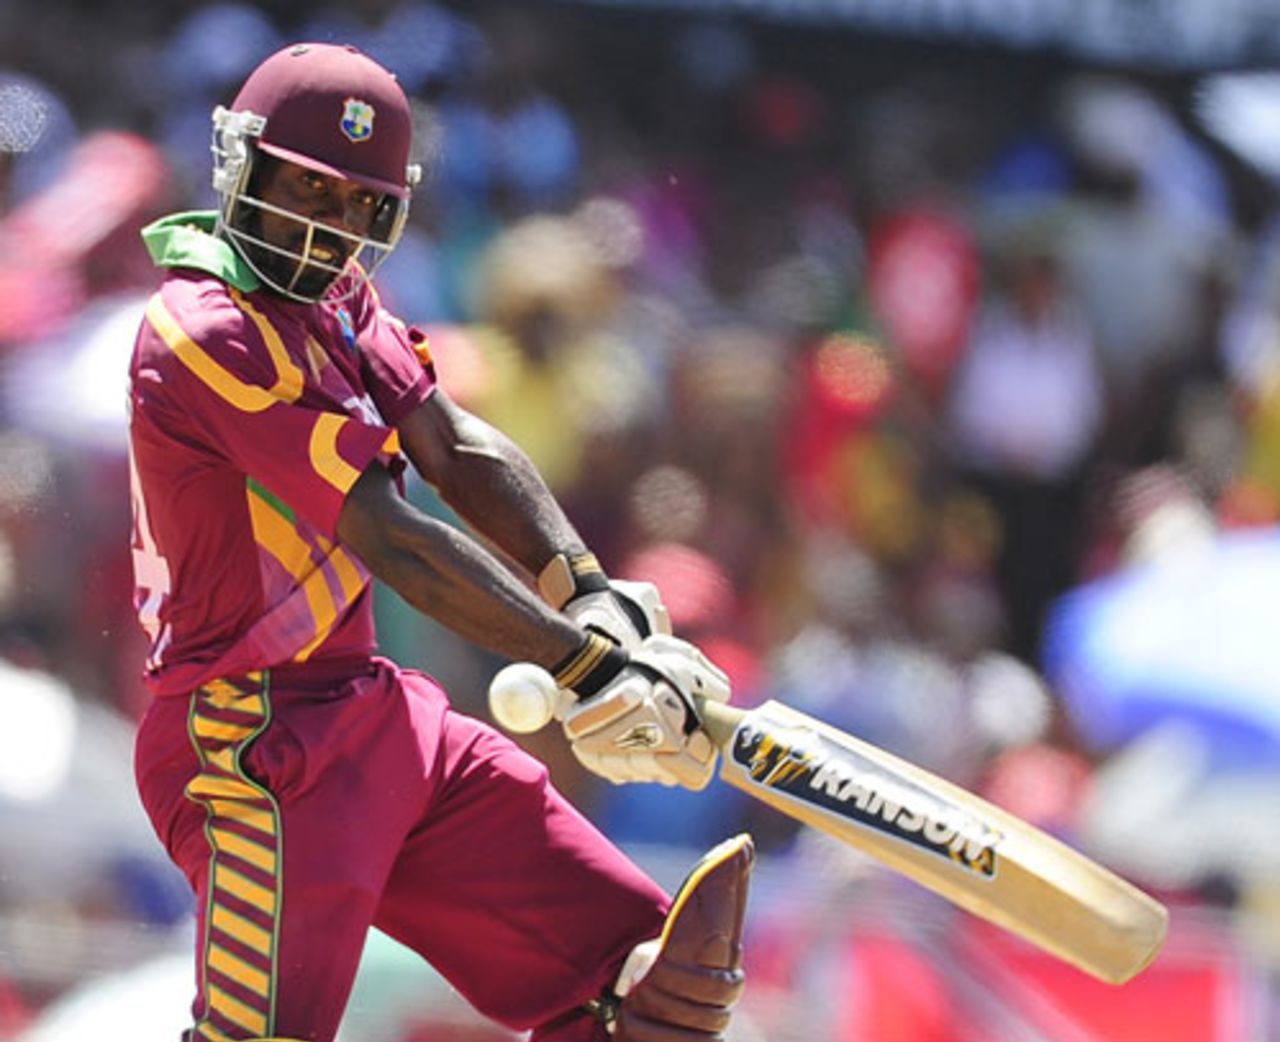 Dale Richards cuts during his half-century, West Indies v South Africa, 4th ODI, Dominica, May 30, 2010